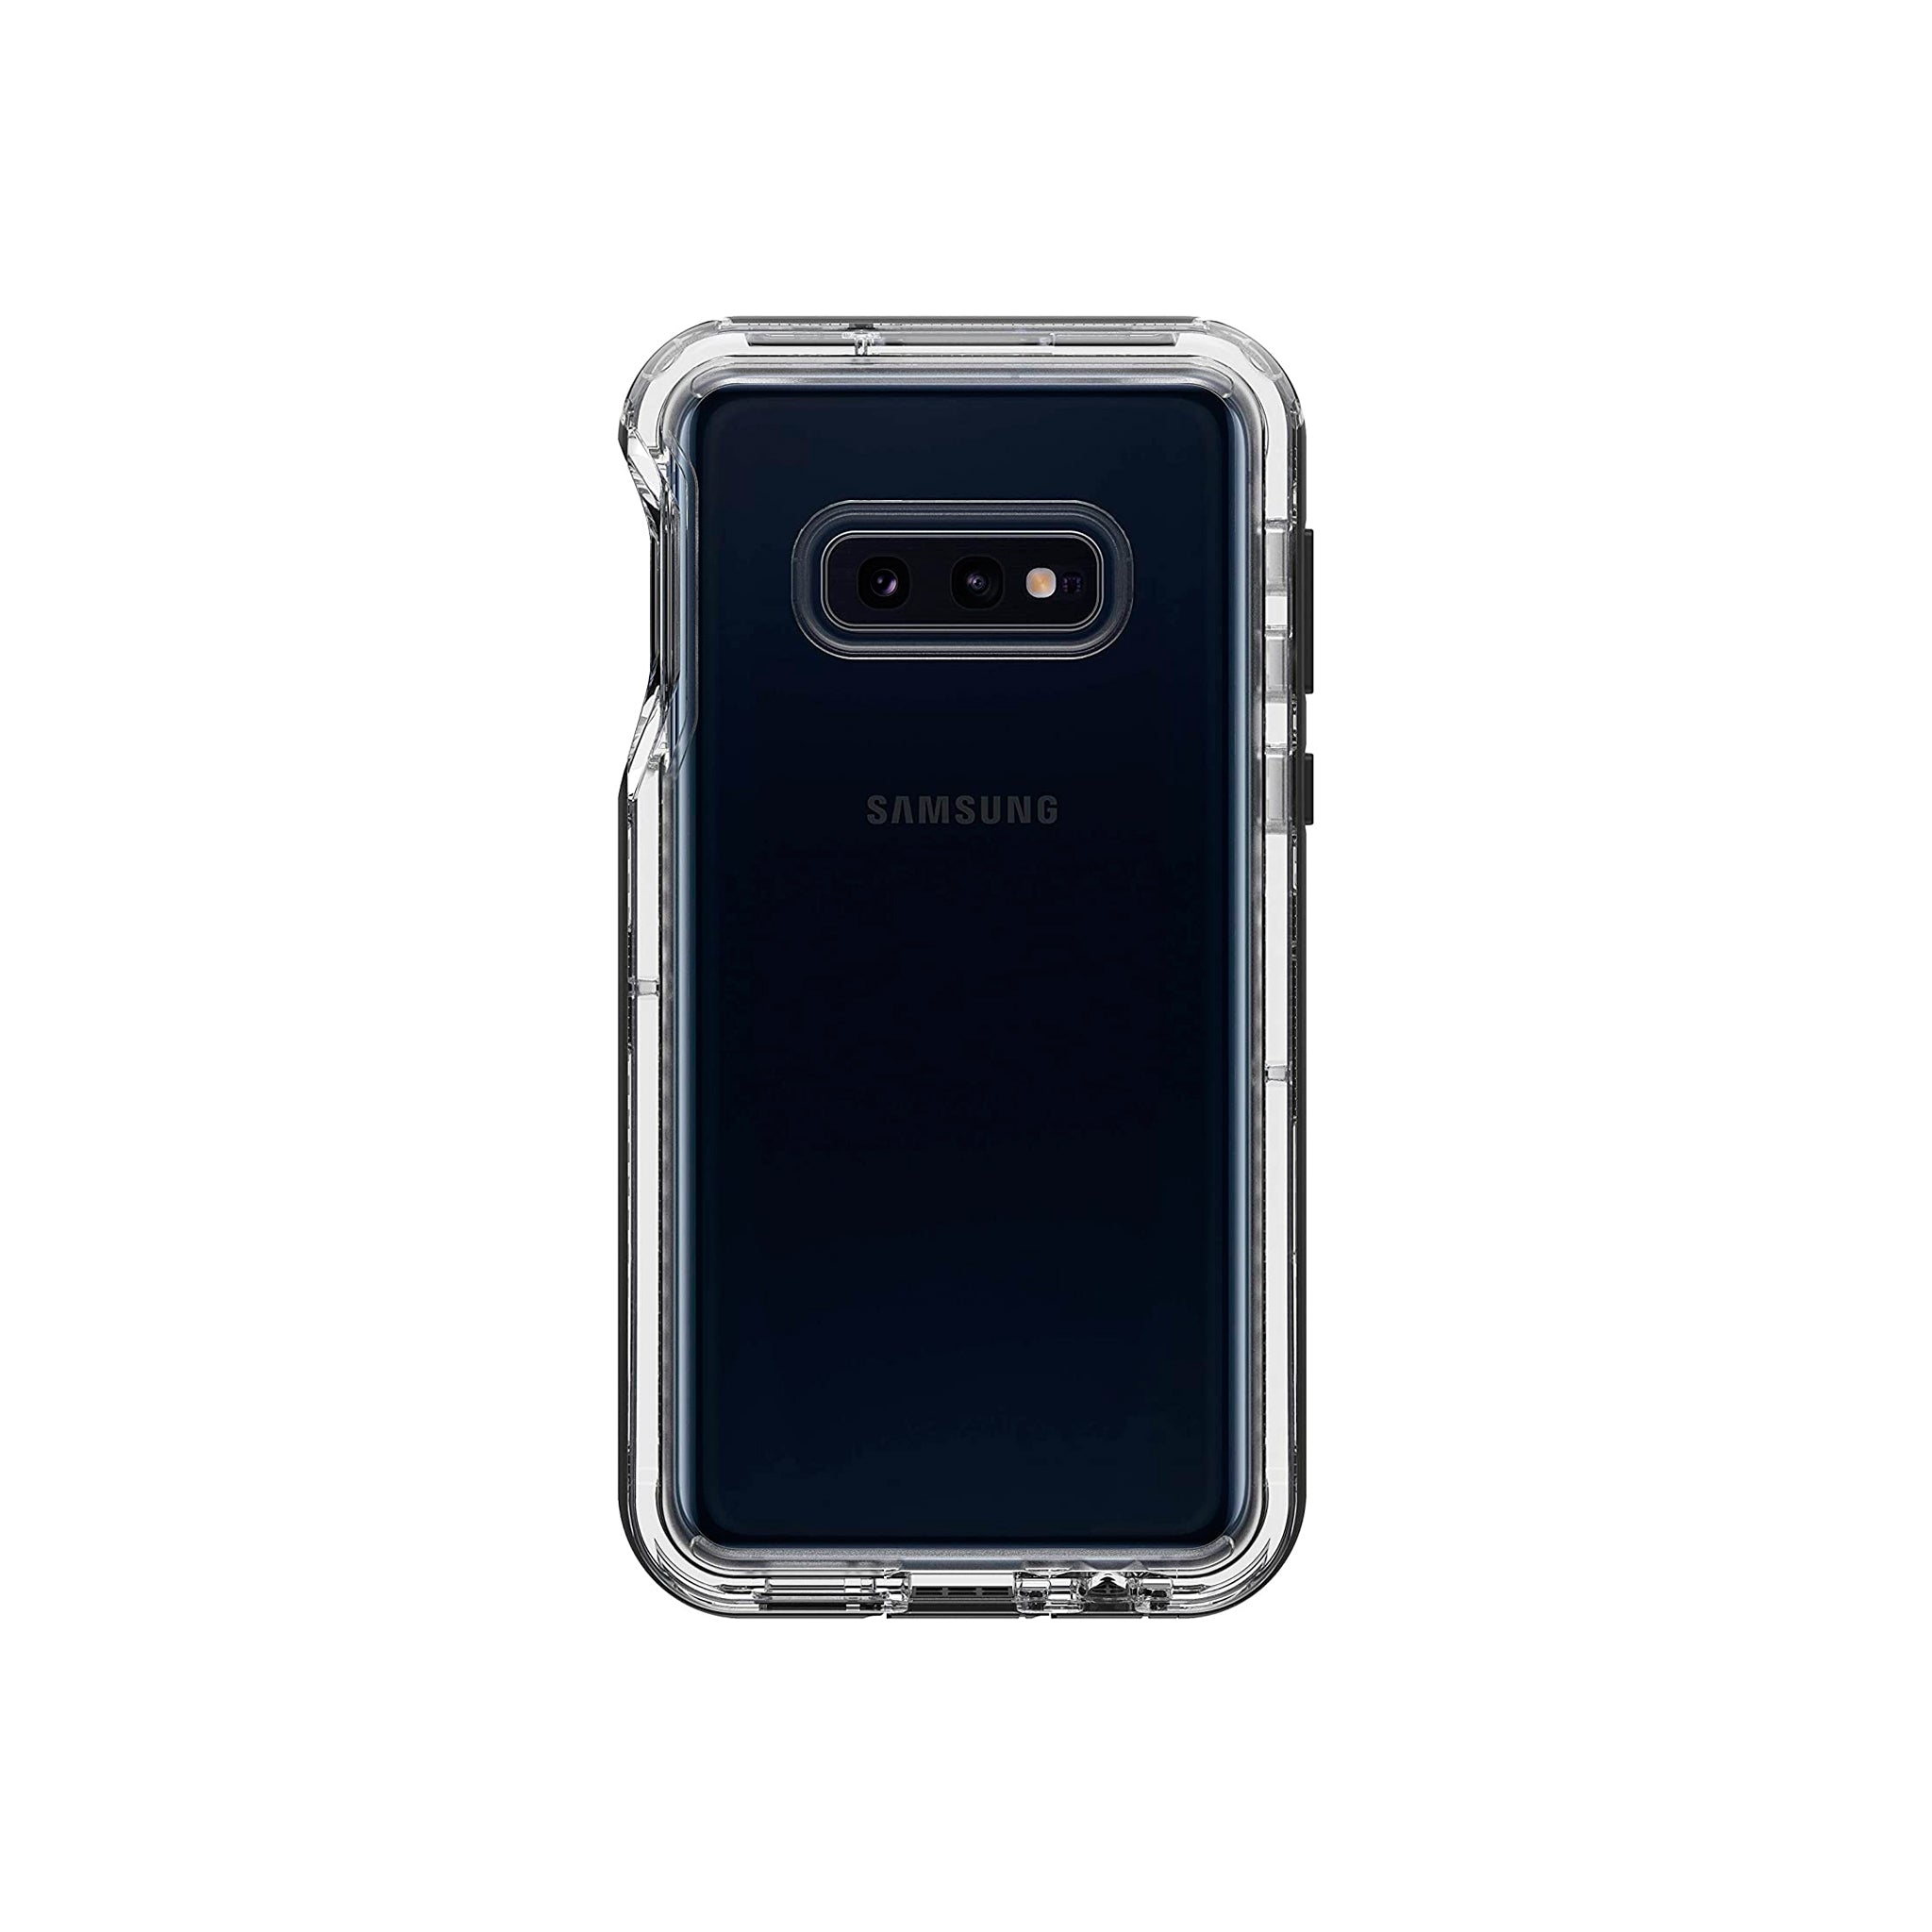 LifeProof - Next Series Case for Samsung Galaxy S10e - Black